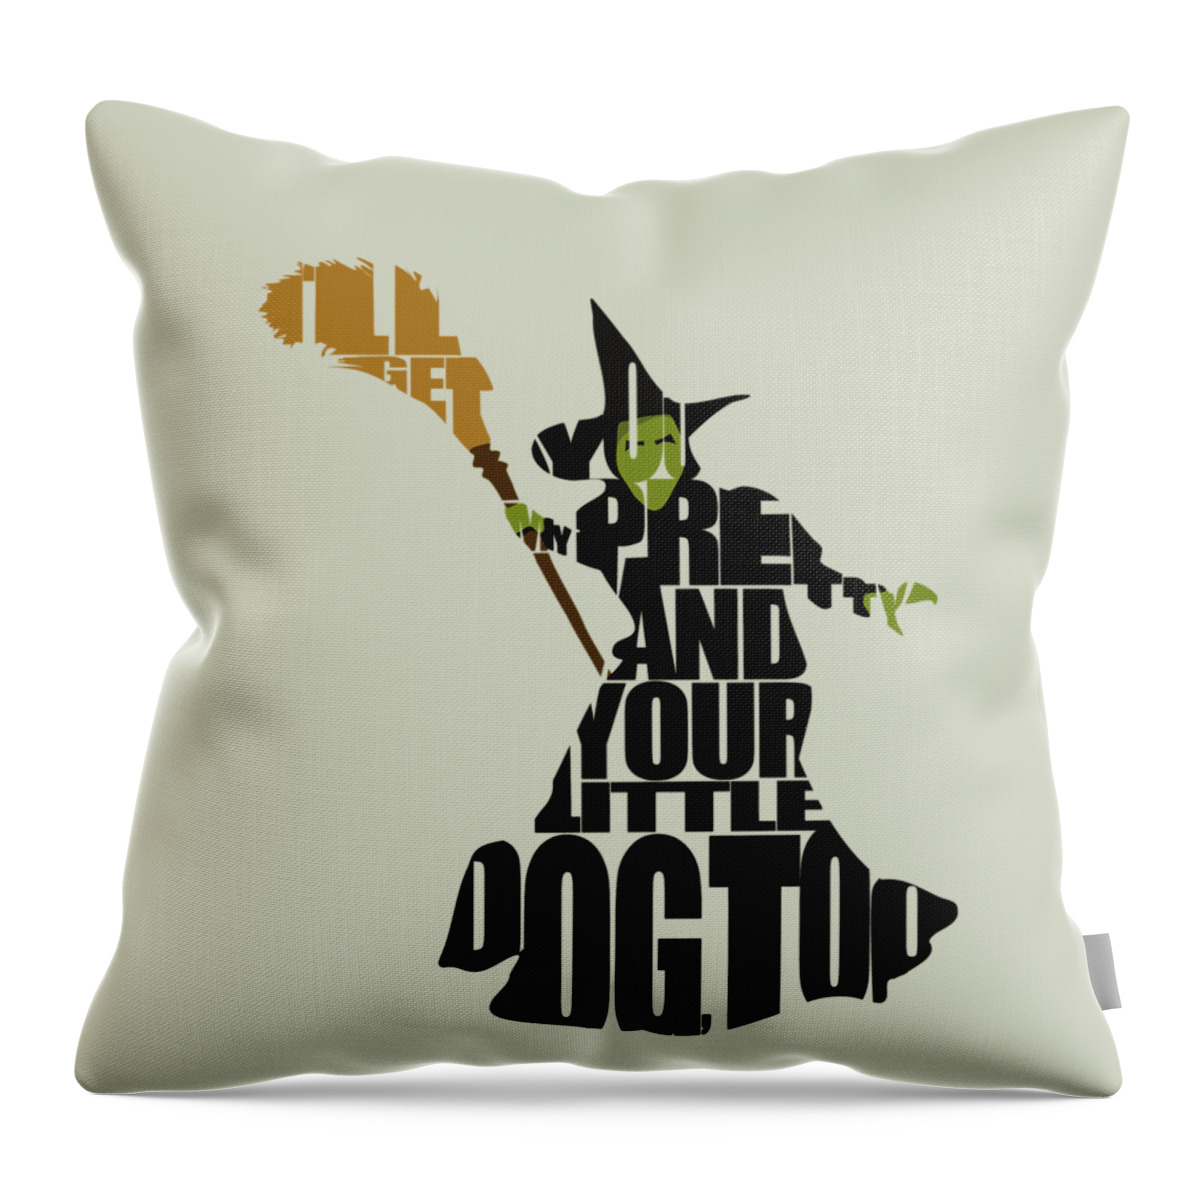 Wicked Witch Of The West Throw Pillow featuring the digital art Wicked Witch of the West by Inspirowl Design